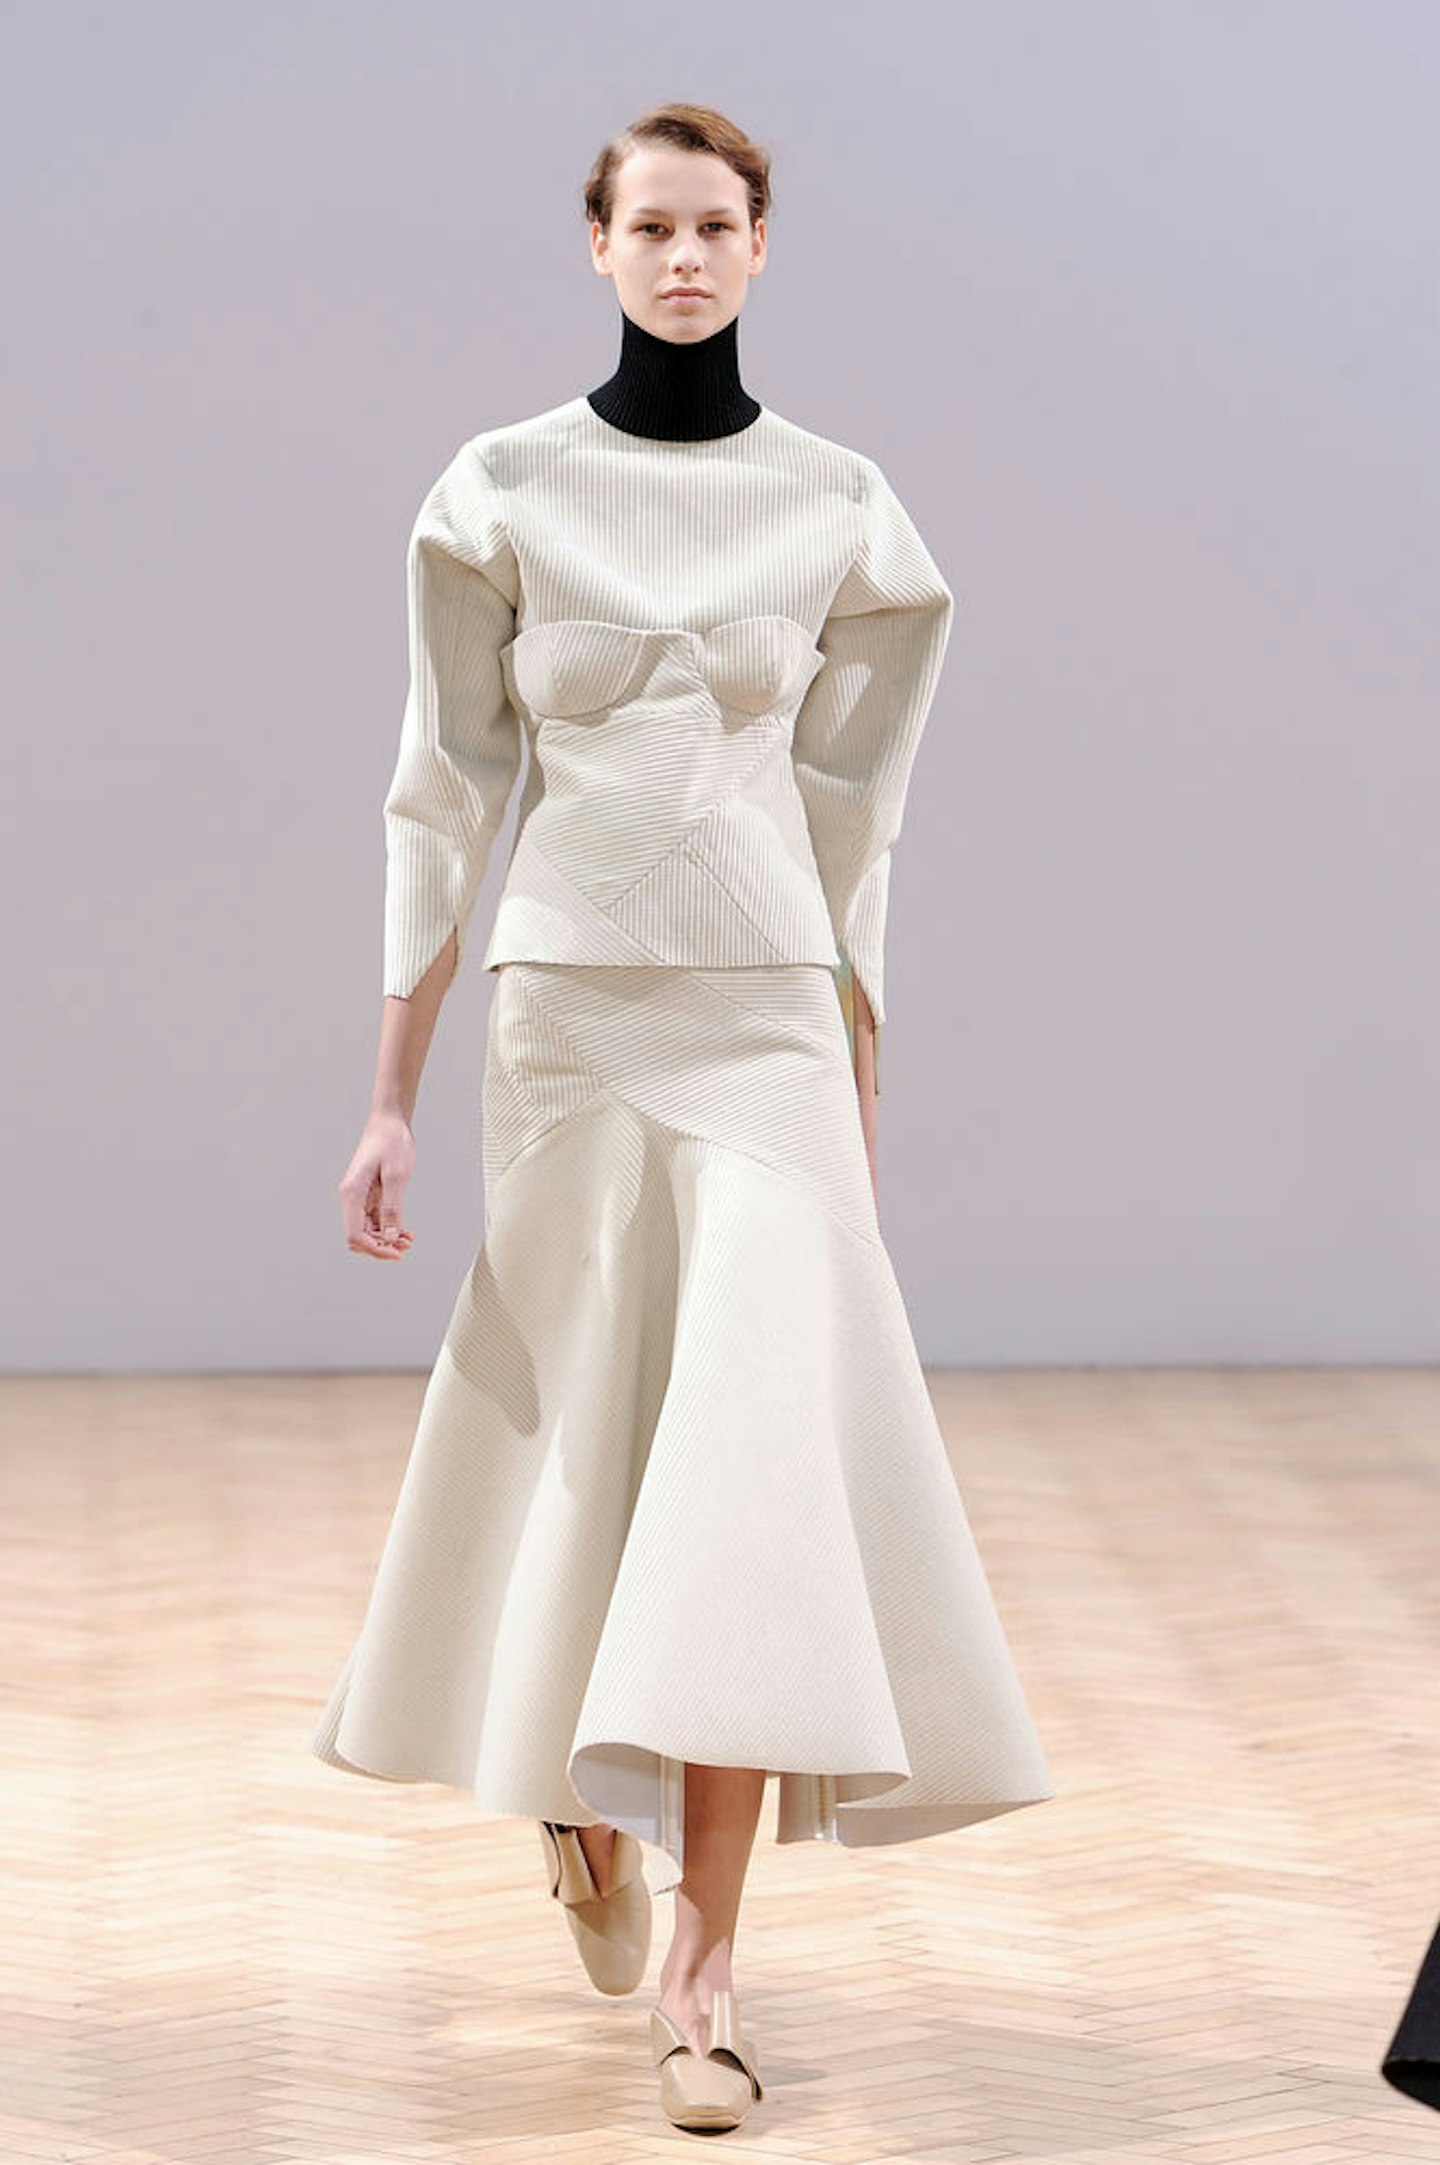 graduating in 2005.The label J.W.ANDERSON was launched in 2008